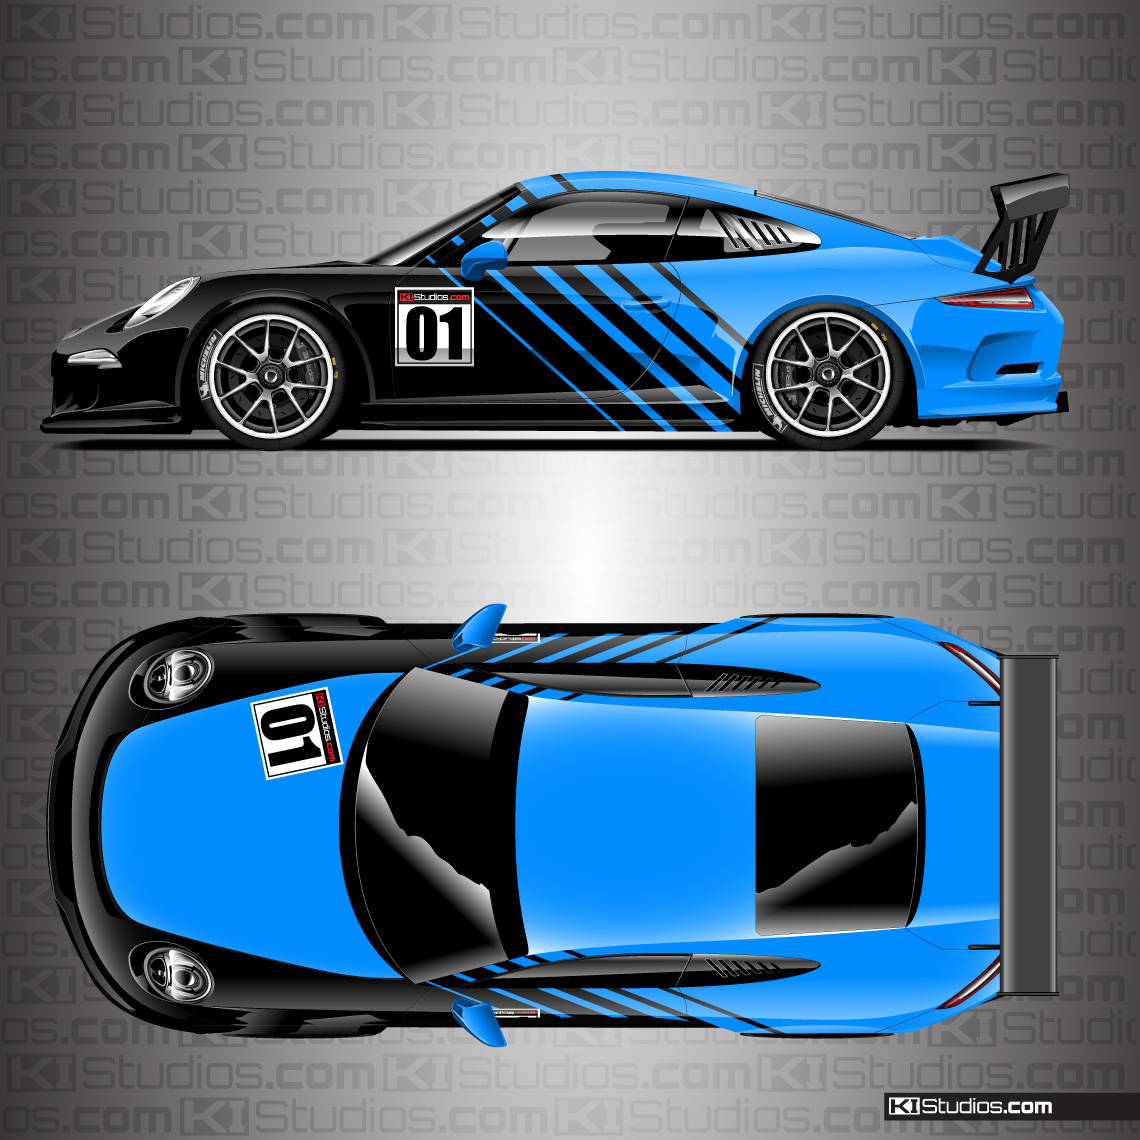 Porsche 911 Cup Car Racing Livery Contra in Azure Blue